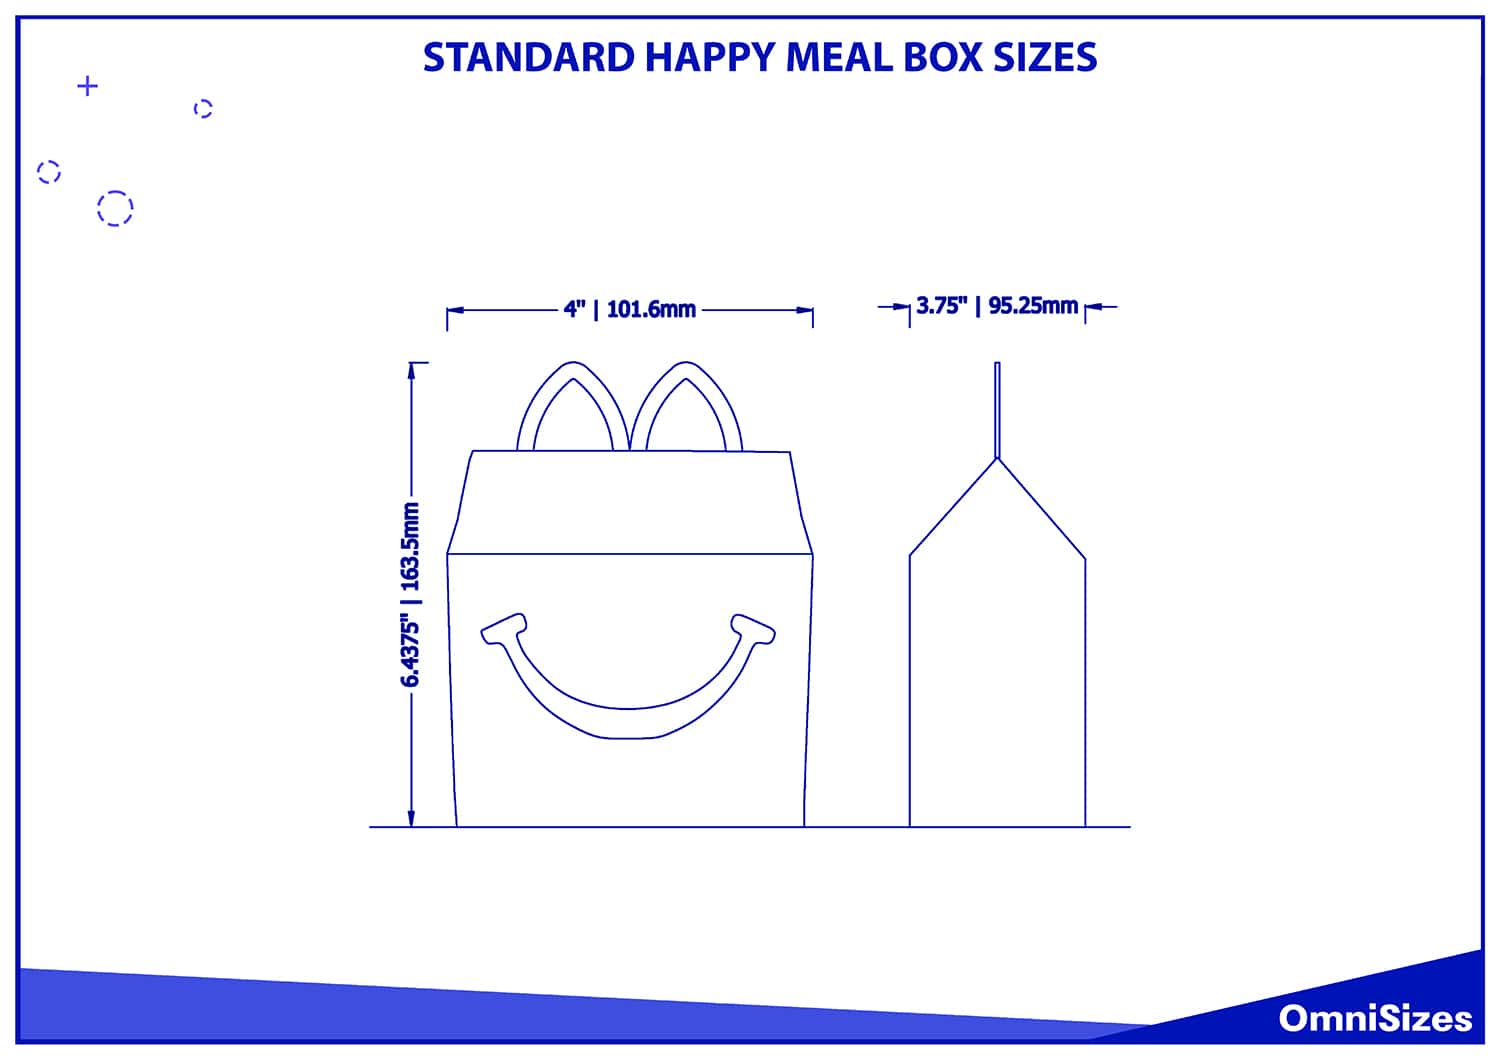 Standard happy meal box sizes